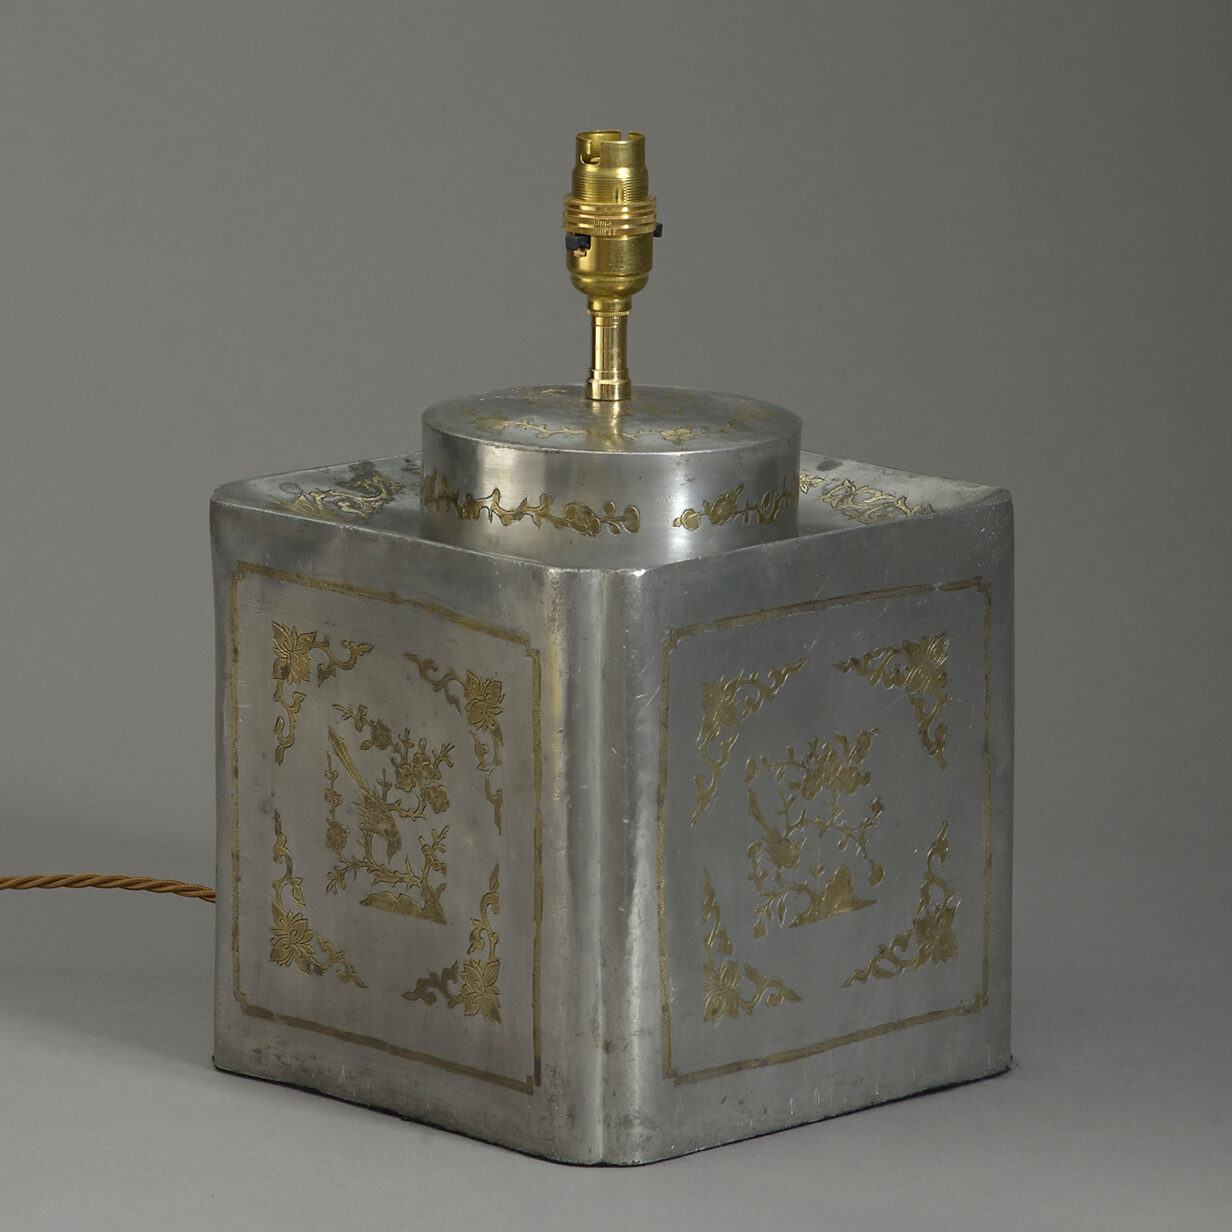 A Polished Brass Inlaid Pewter Tea Canister Lamp